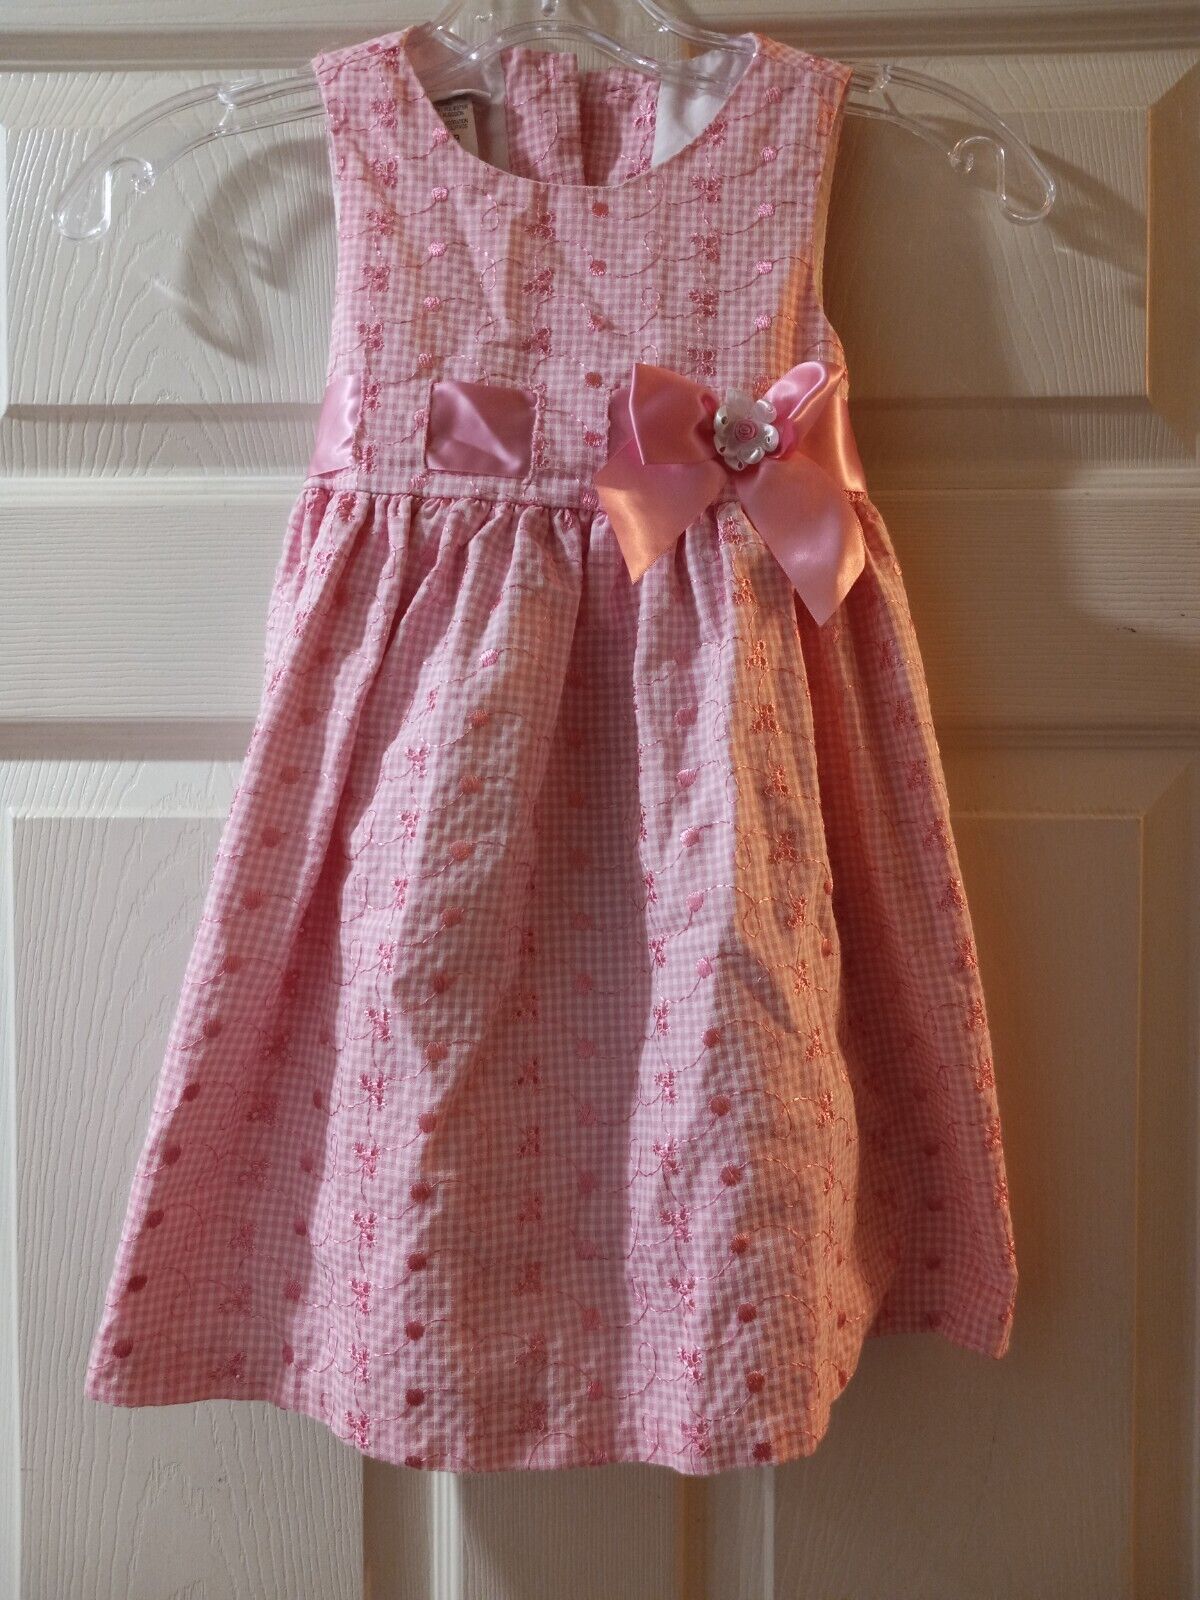 Primary image for Bonnie Jean Pink Gingham Bow Summer Dress Girls Size 4T